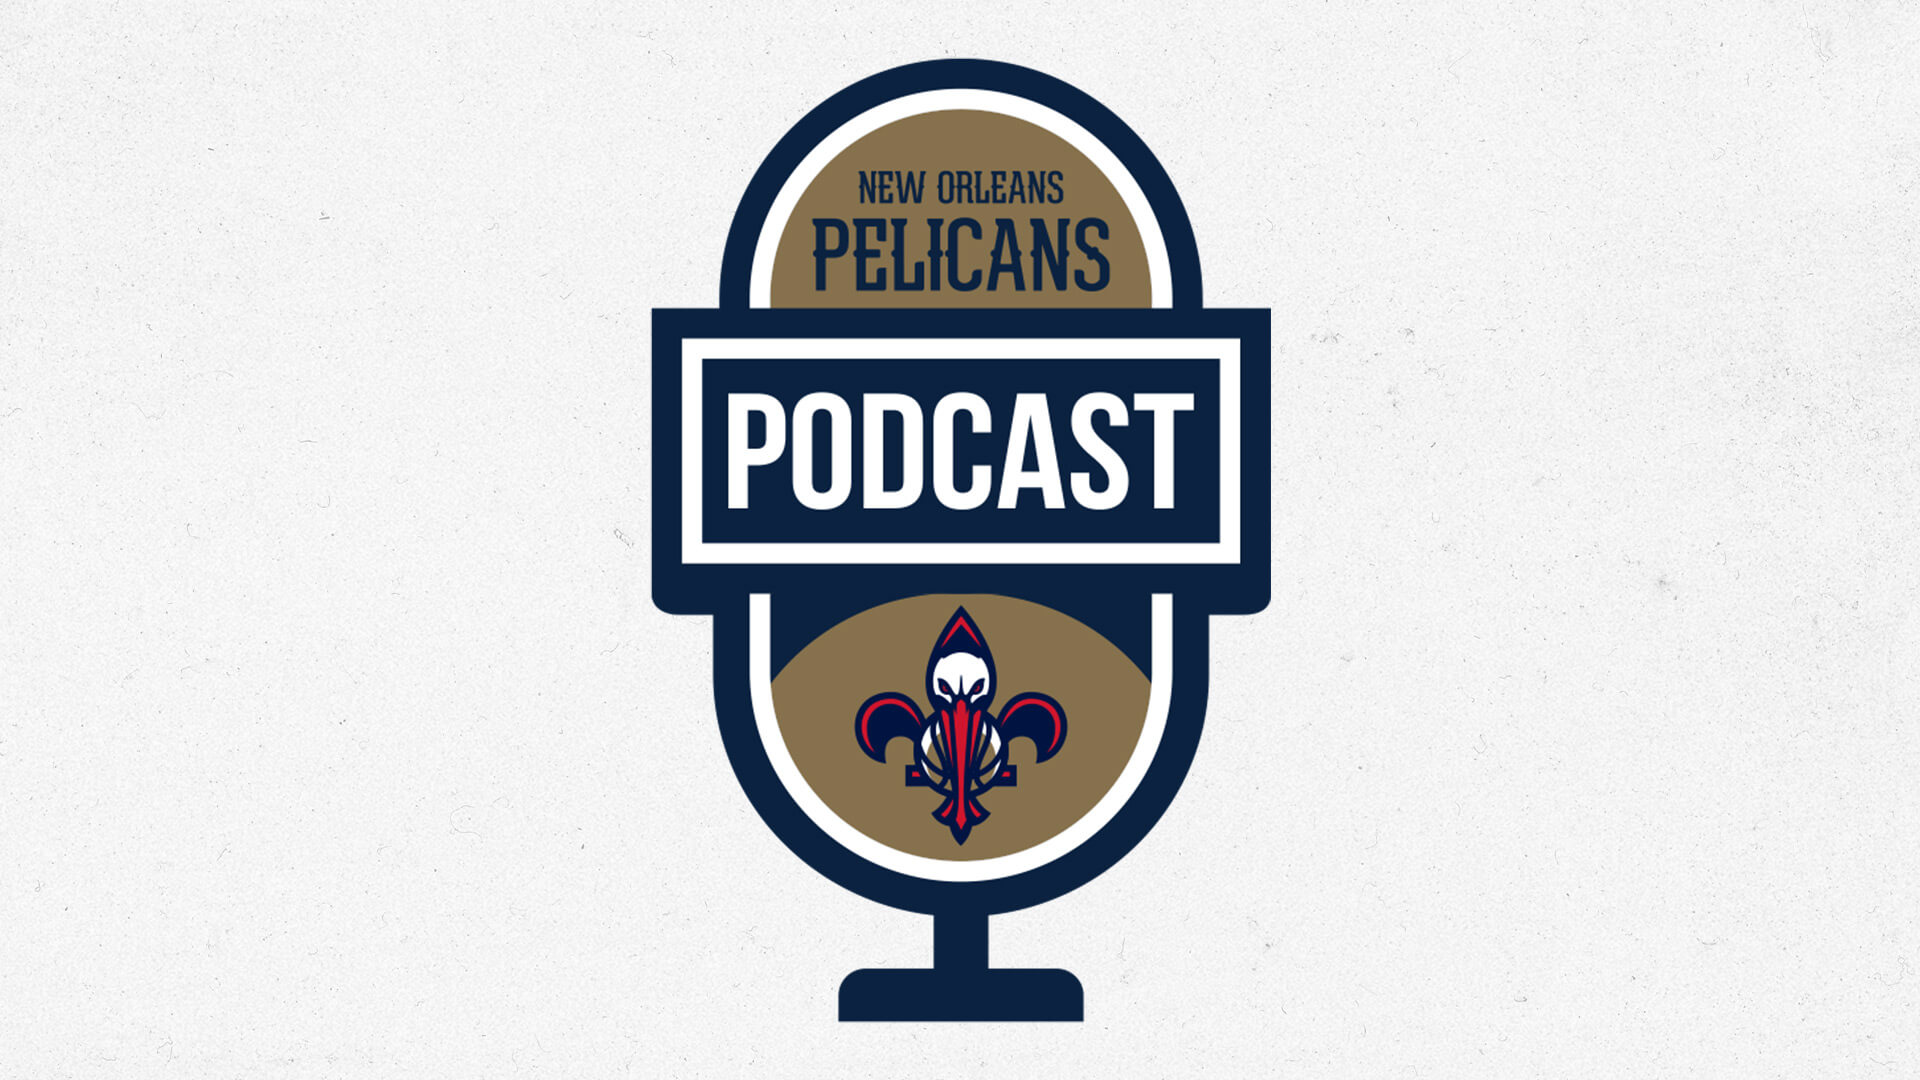 Recap of tough loss to Grizzlies, look ahead to Cavs, 5-game homestand | Pelicans Podcast